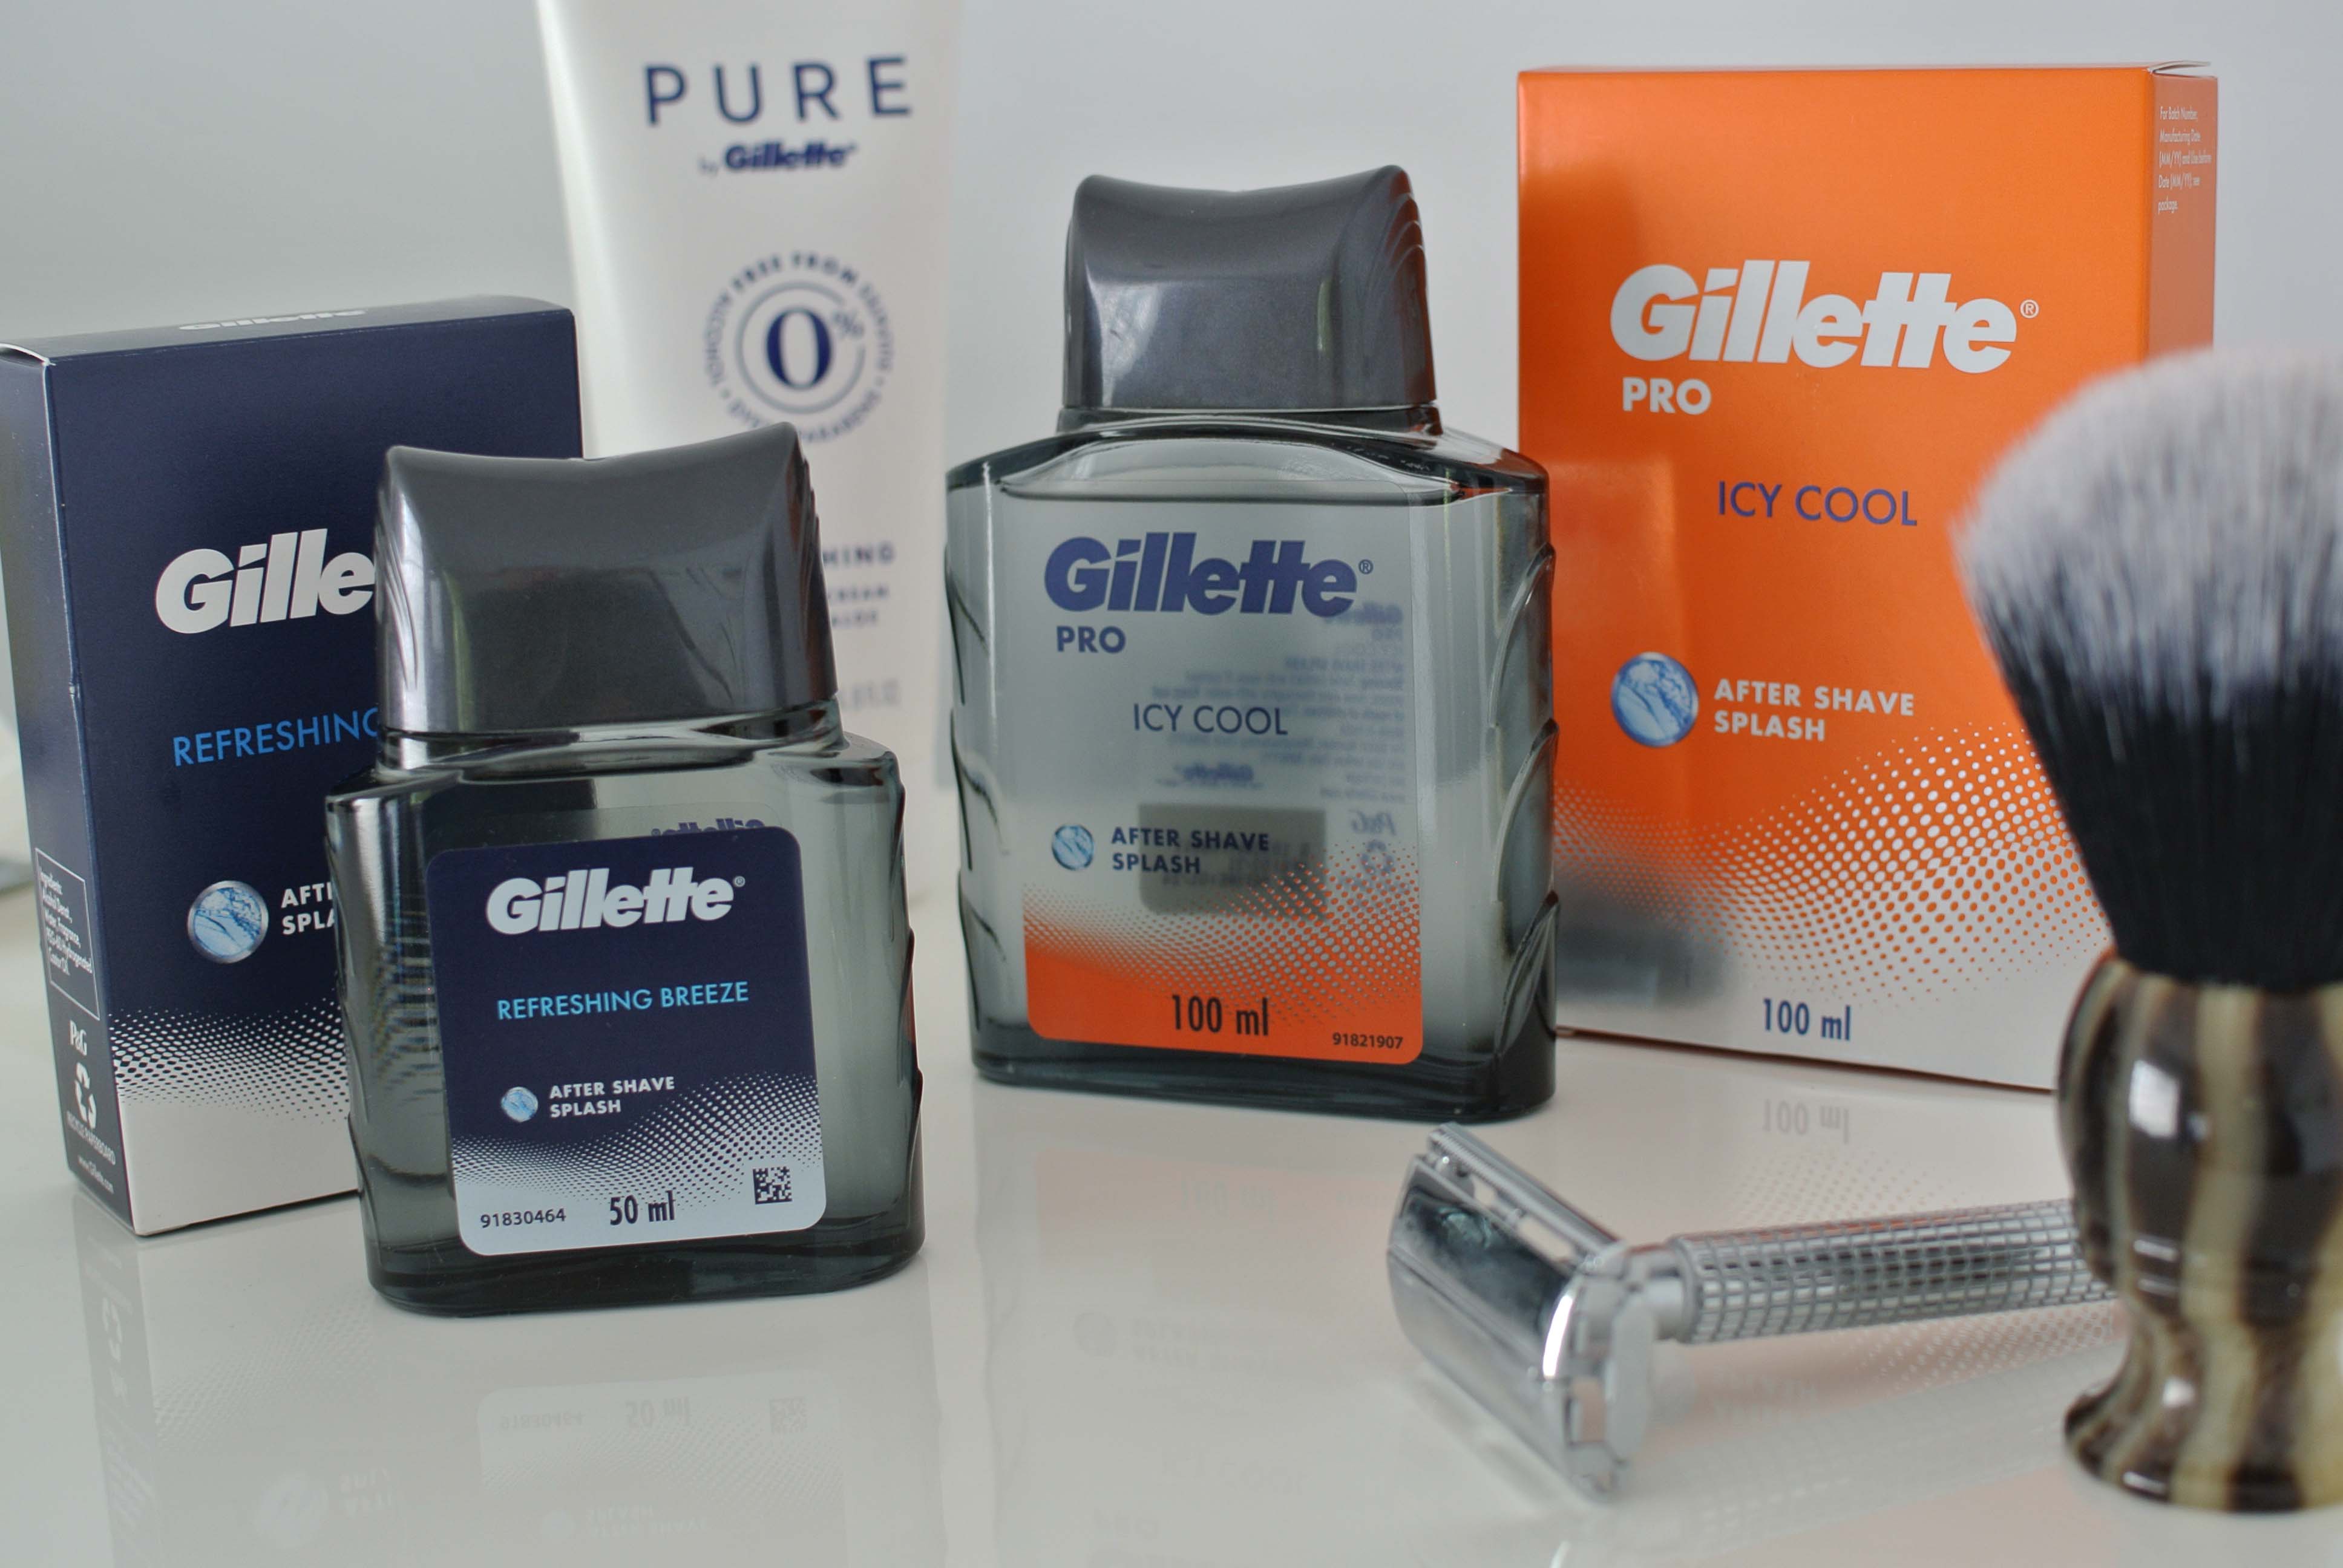 
Gillette Refreshing Breeze and Gillette Icy Cool
